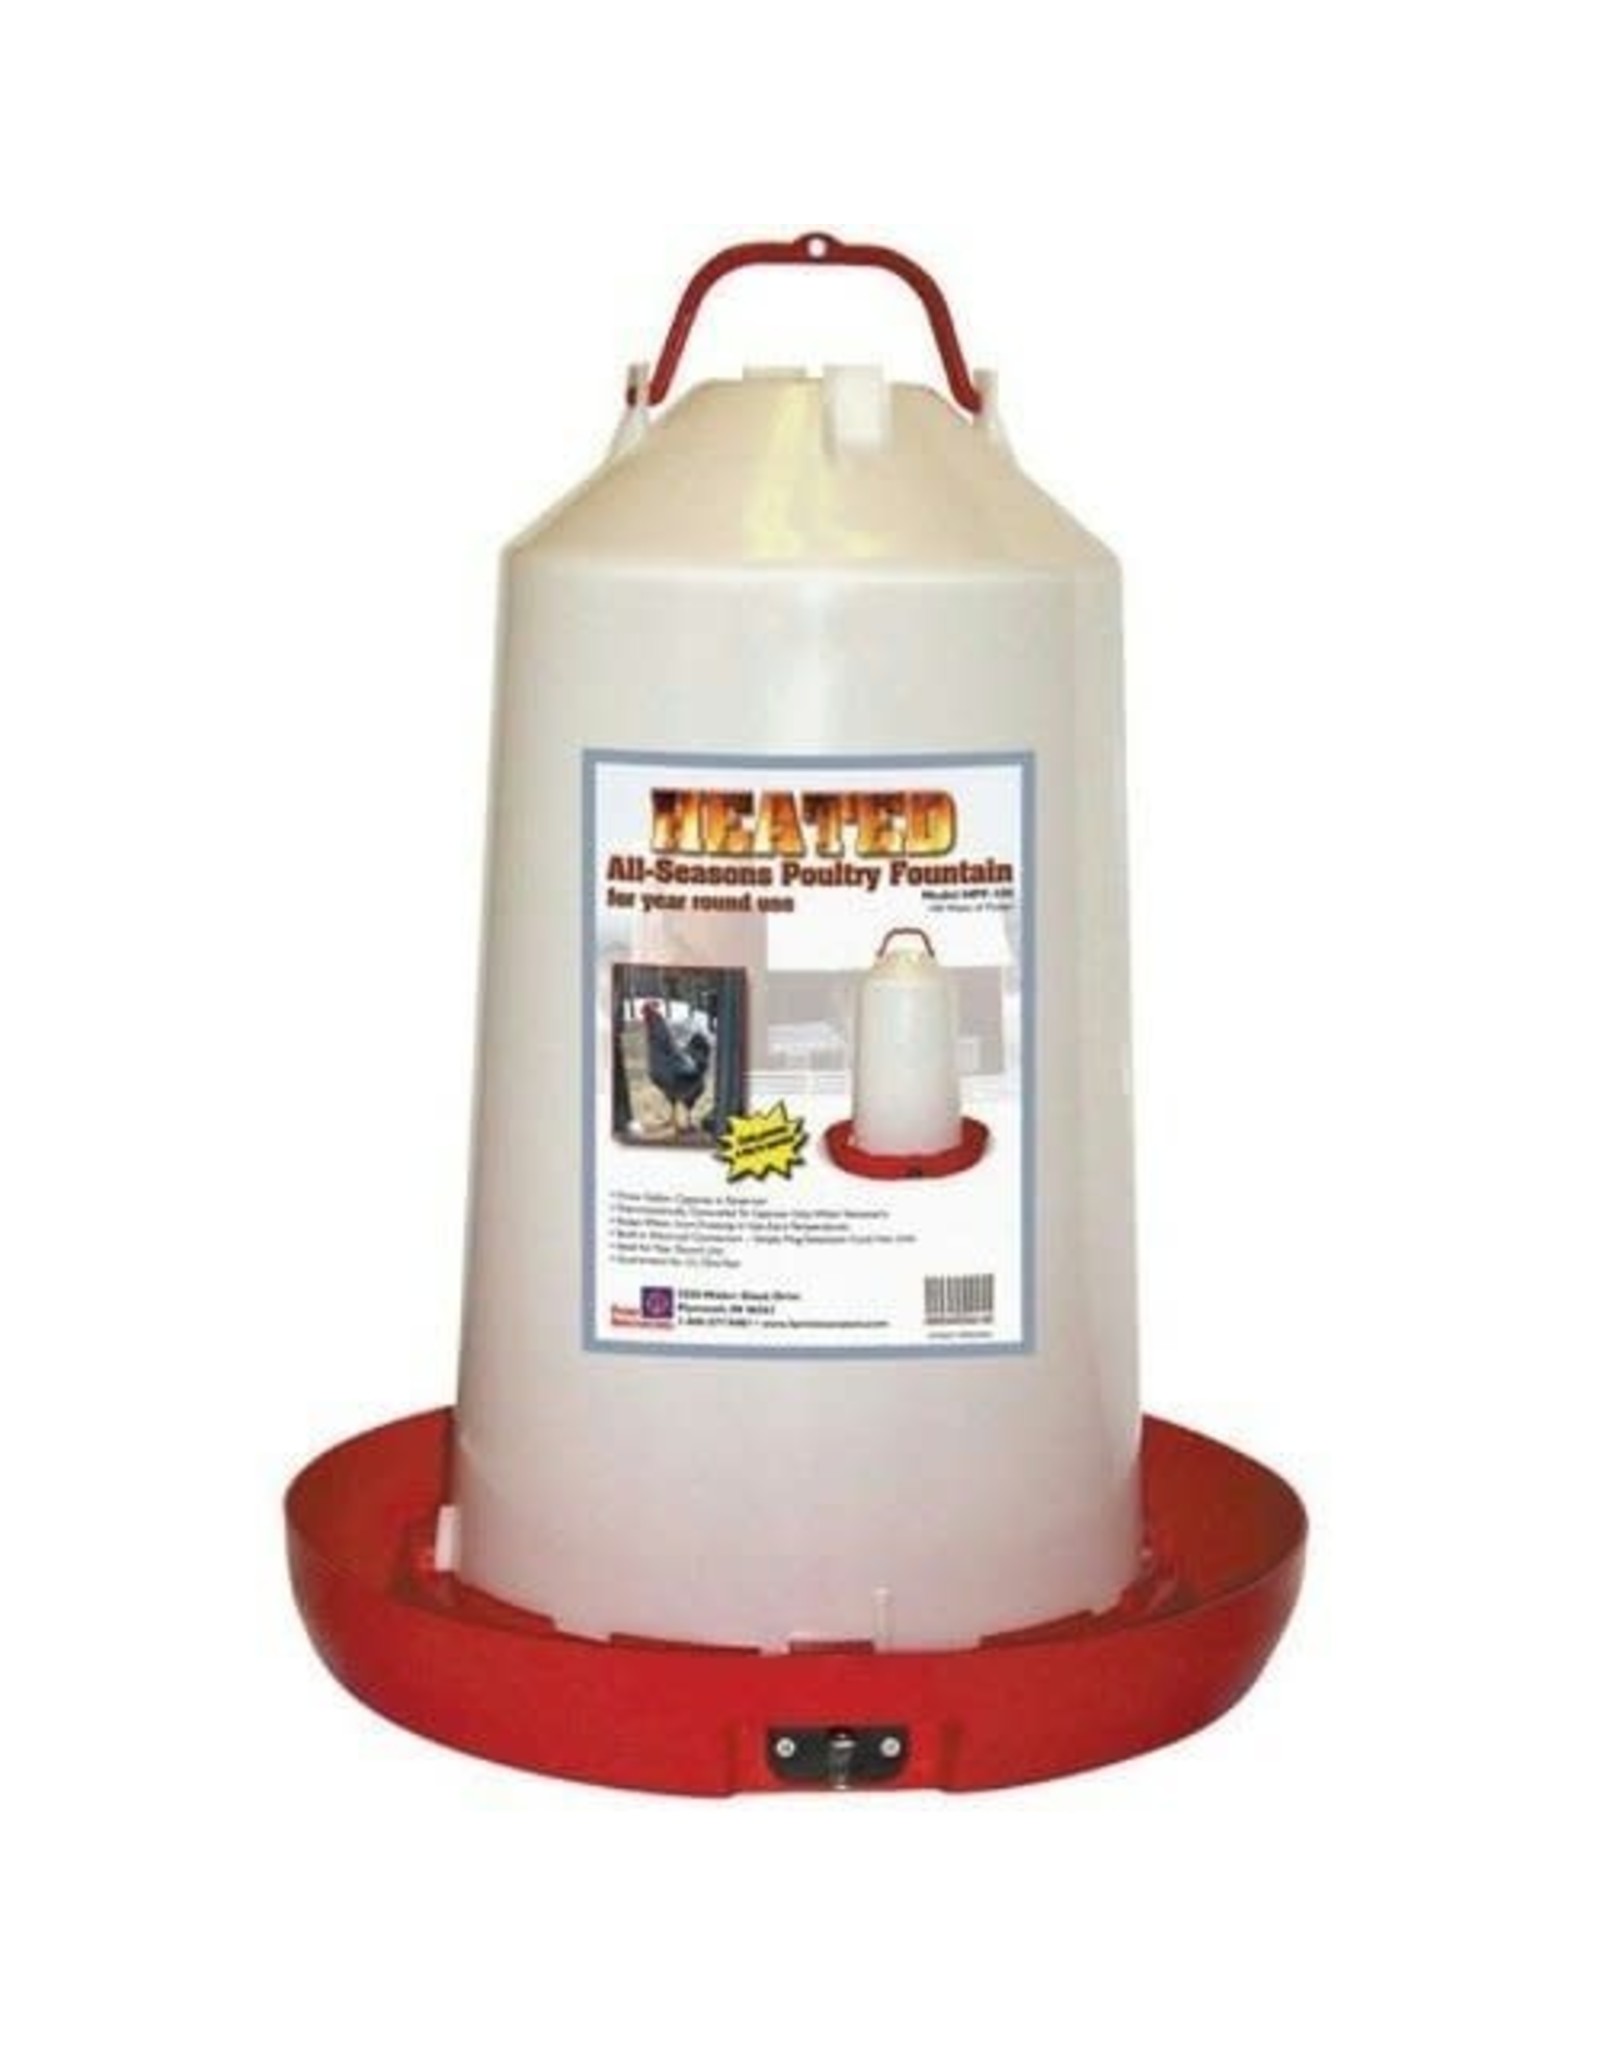 Miller Heated Plastic Poultry Fount 3 GAL